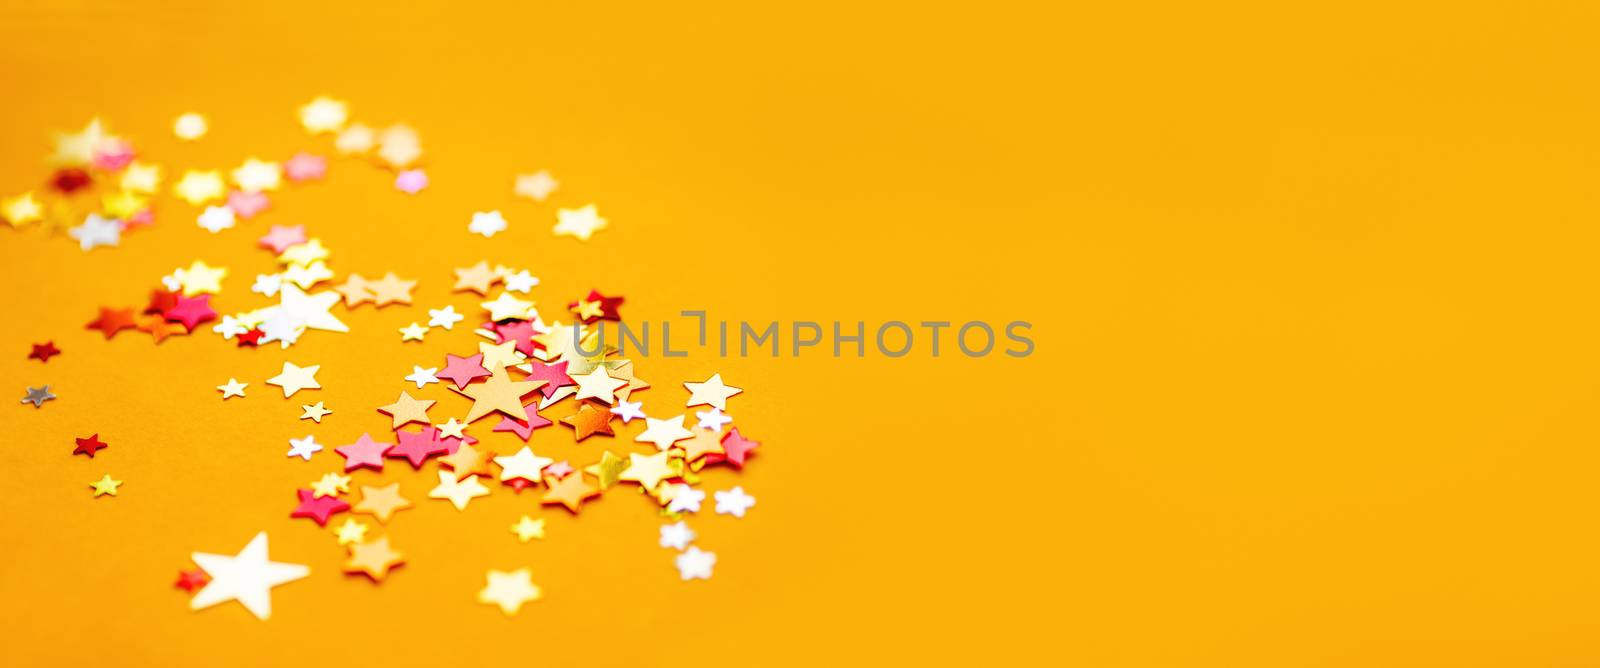 Yellow holiday background with colorful star confetti. Good back by aksenovko